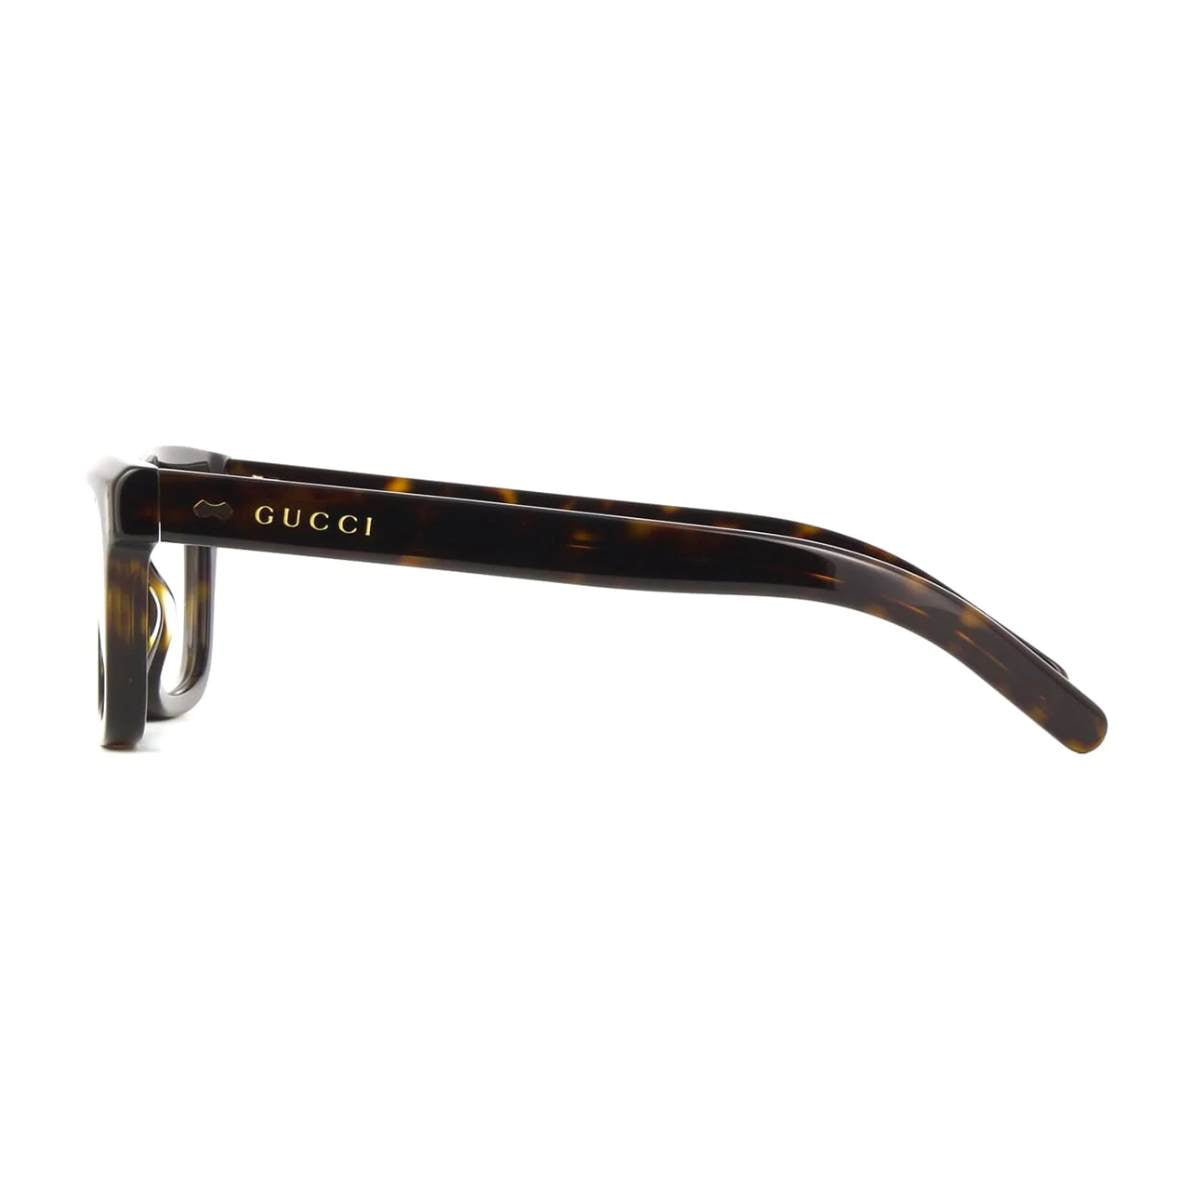 "Stylish Gucci Optical Glasses For Men's At Optorium | Gucci GG1525O 002 Optical Frames"